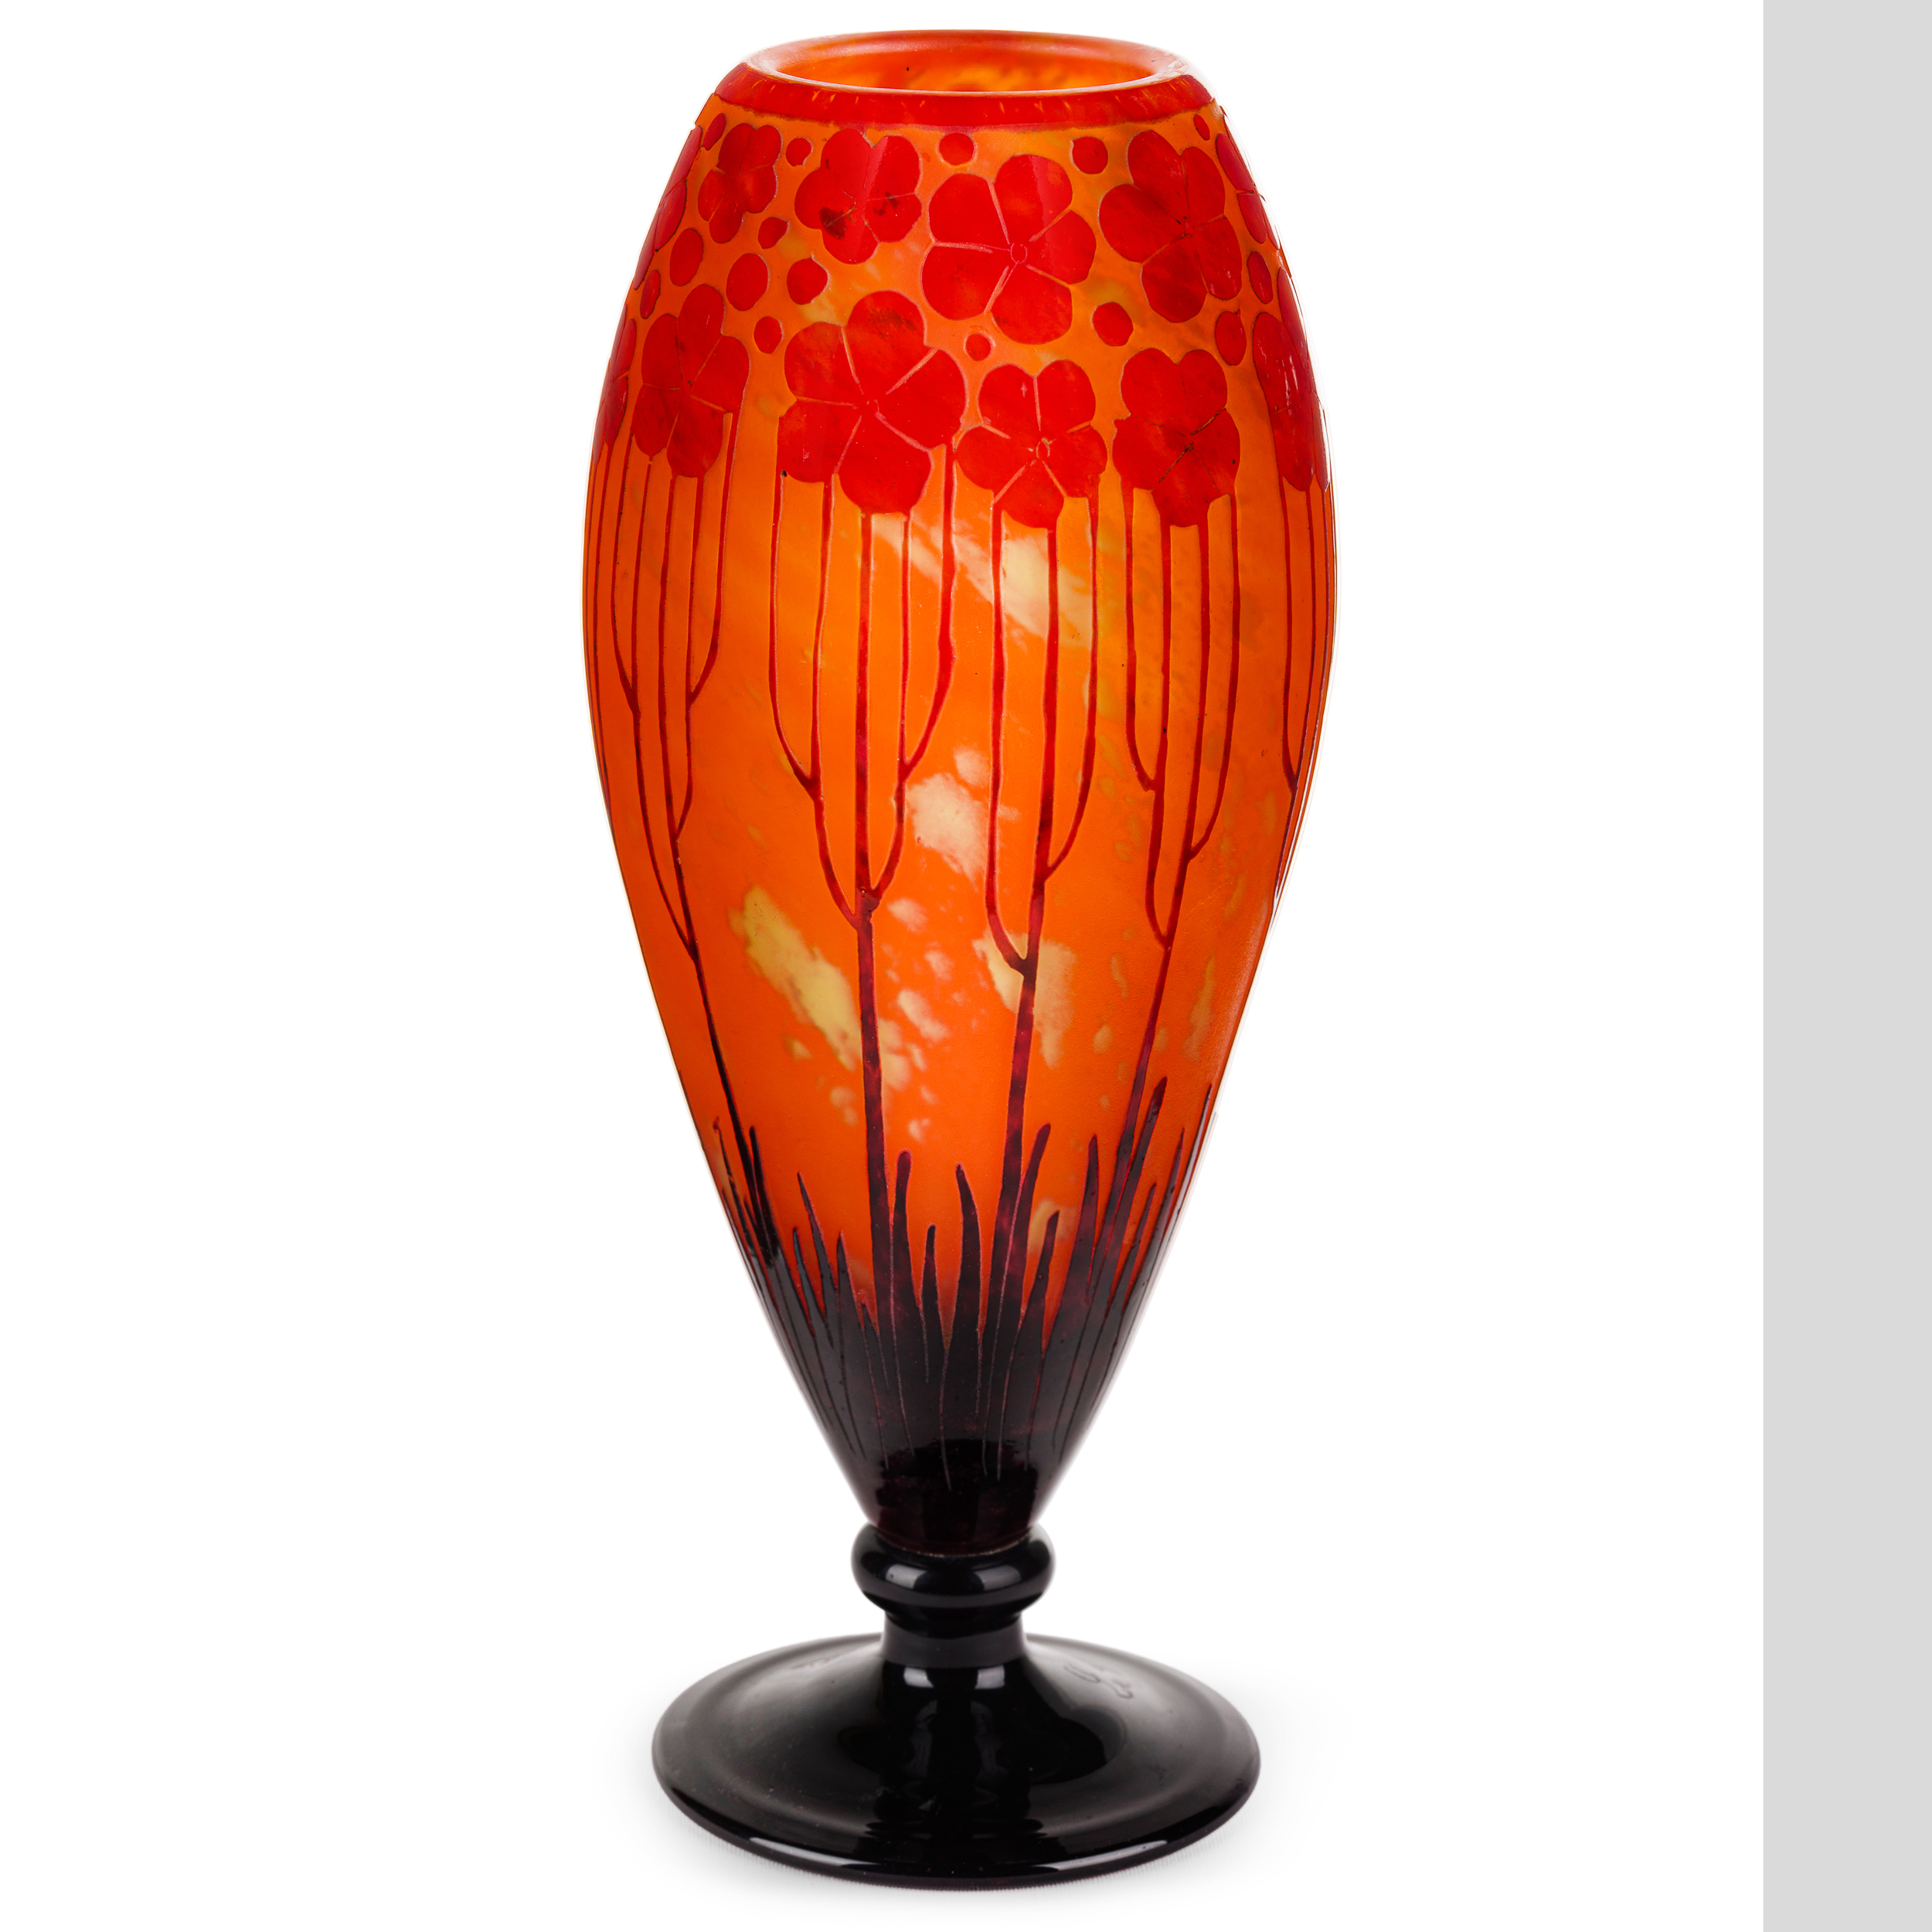 A LE VERRE FRANCAISE GLASS VASE, FIRST QUARTER 20TH CENTURY; SLIGHTLY WORN